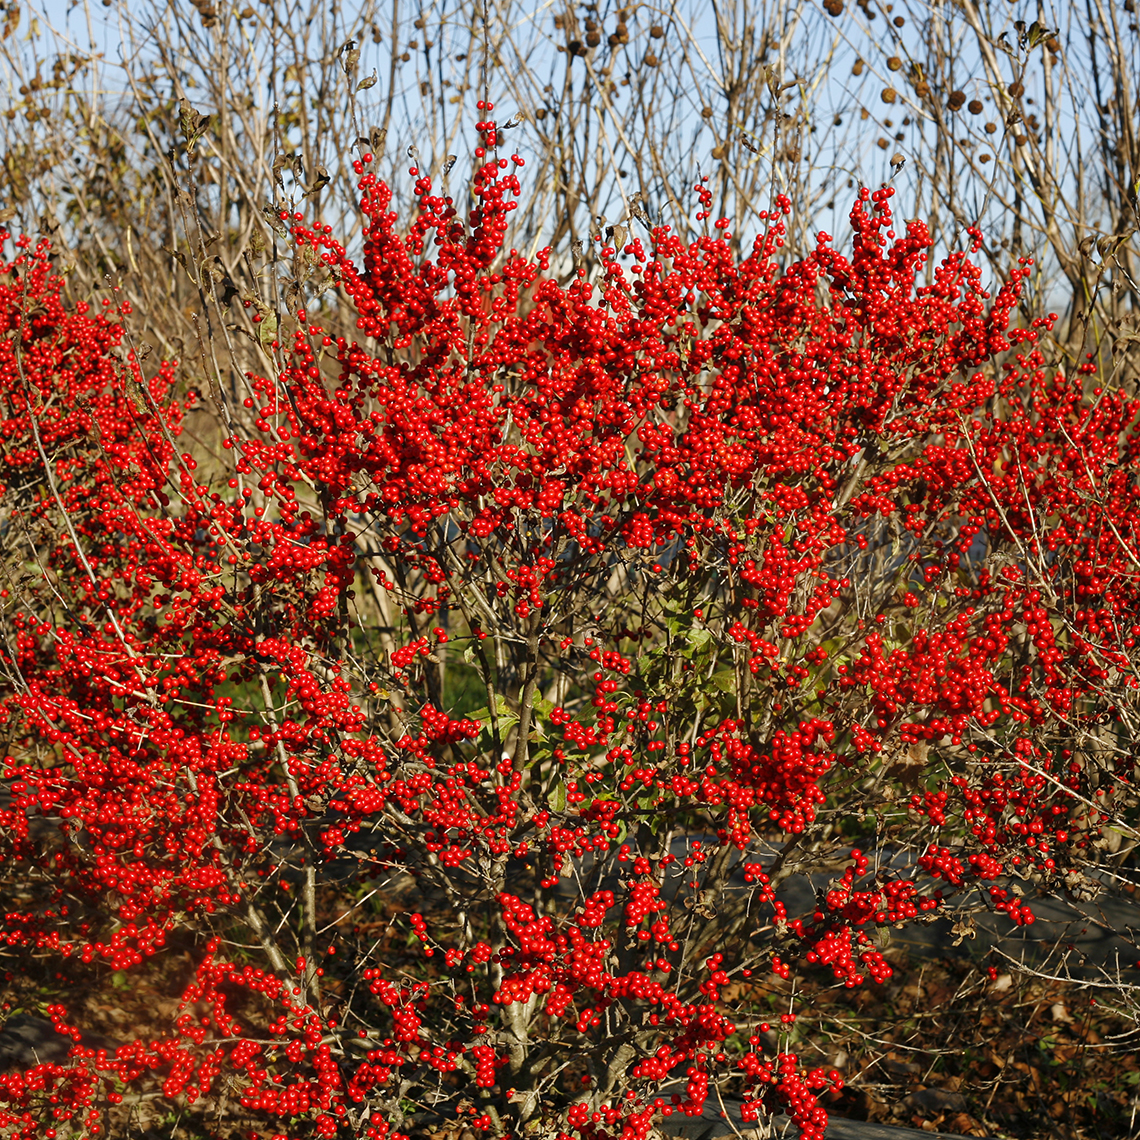 Compact Berry Poppins winterberry holly covered in red fall fruit